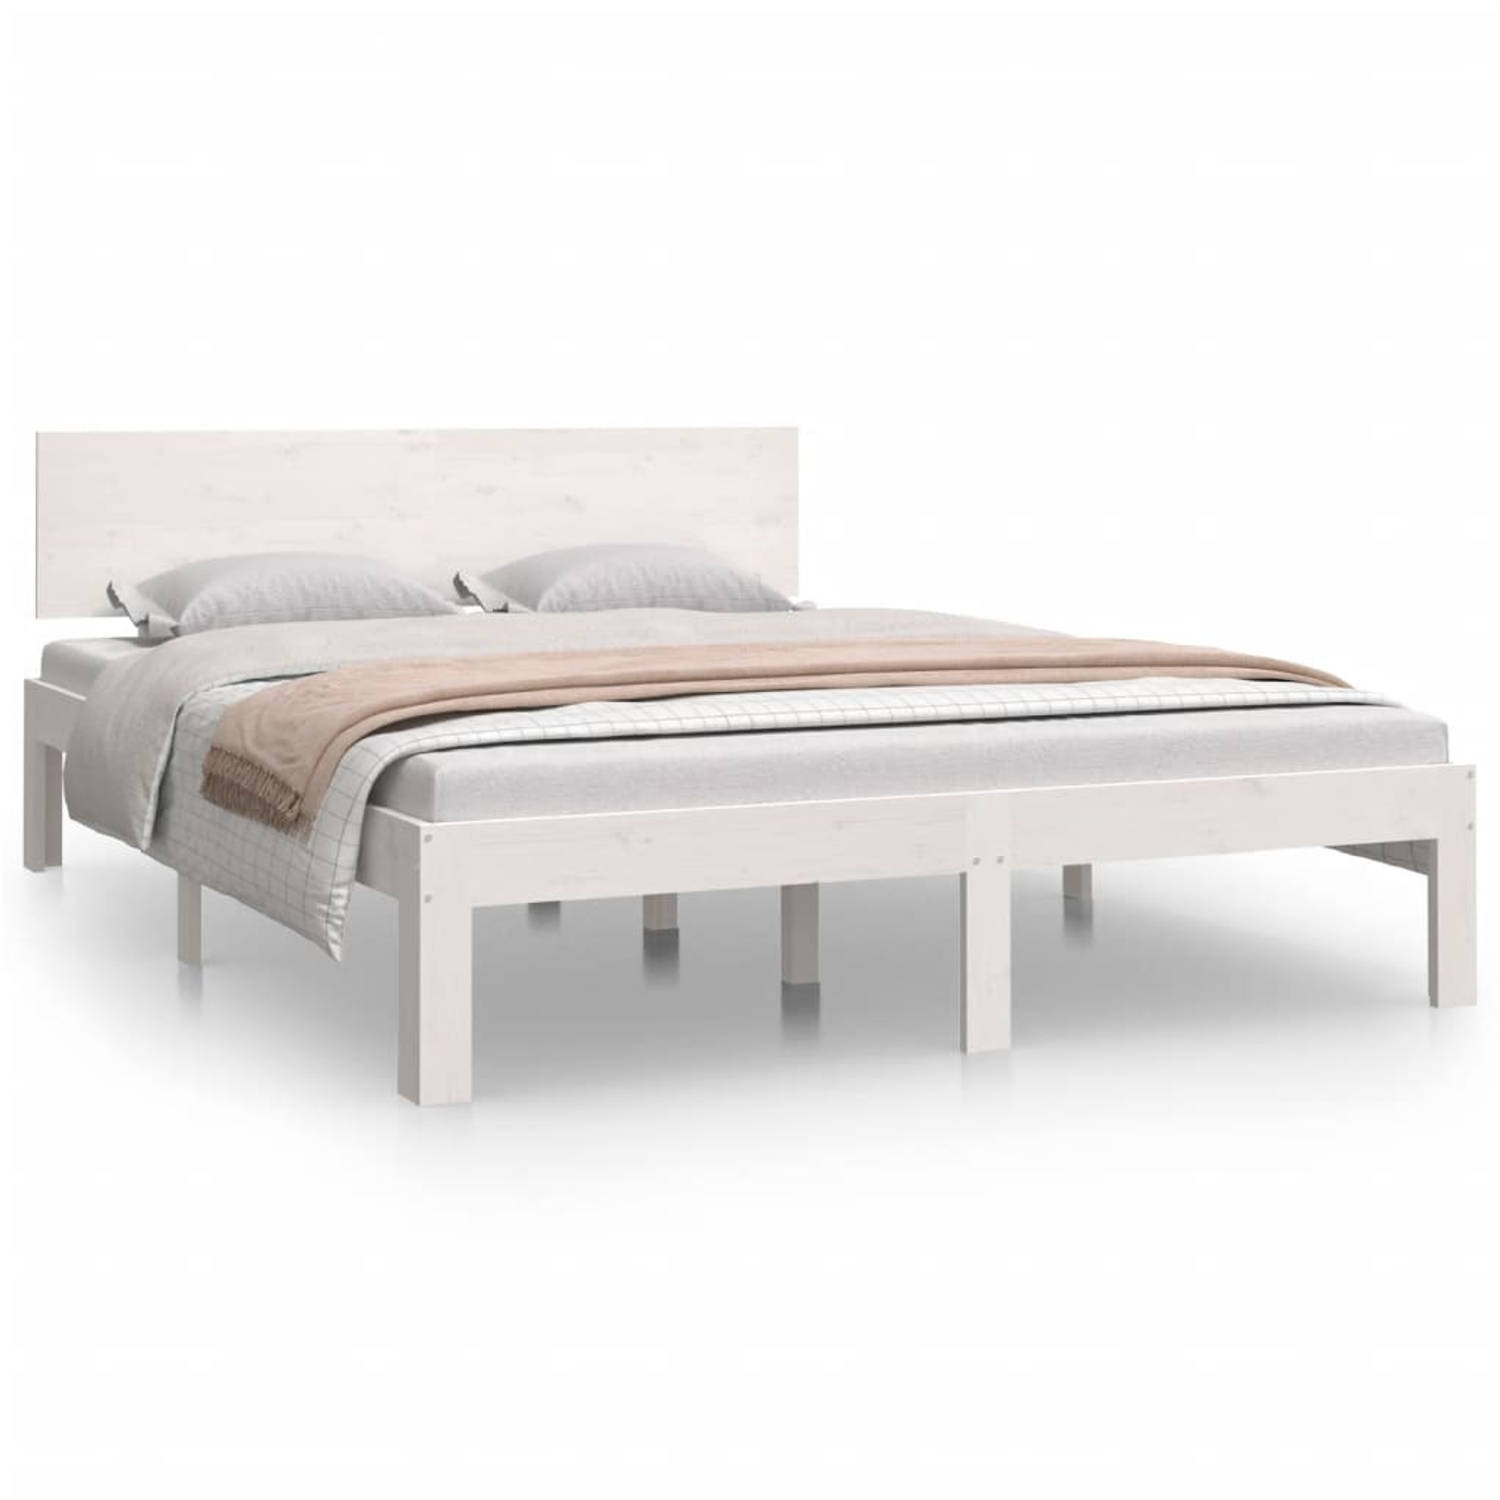 The Living Store Bedframe massief grenenhout wit 150x200 cm King Size - Bed